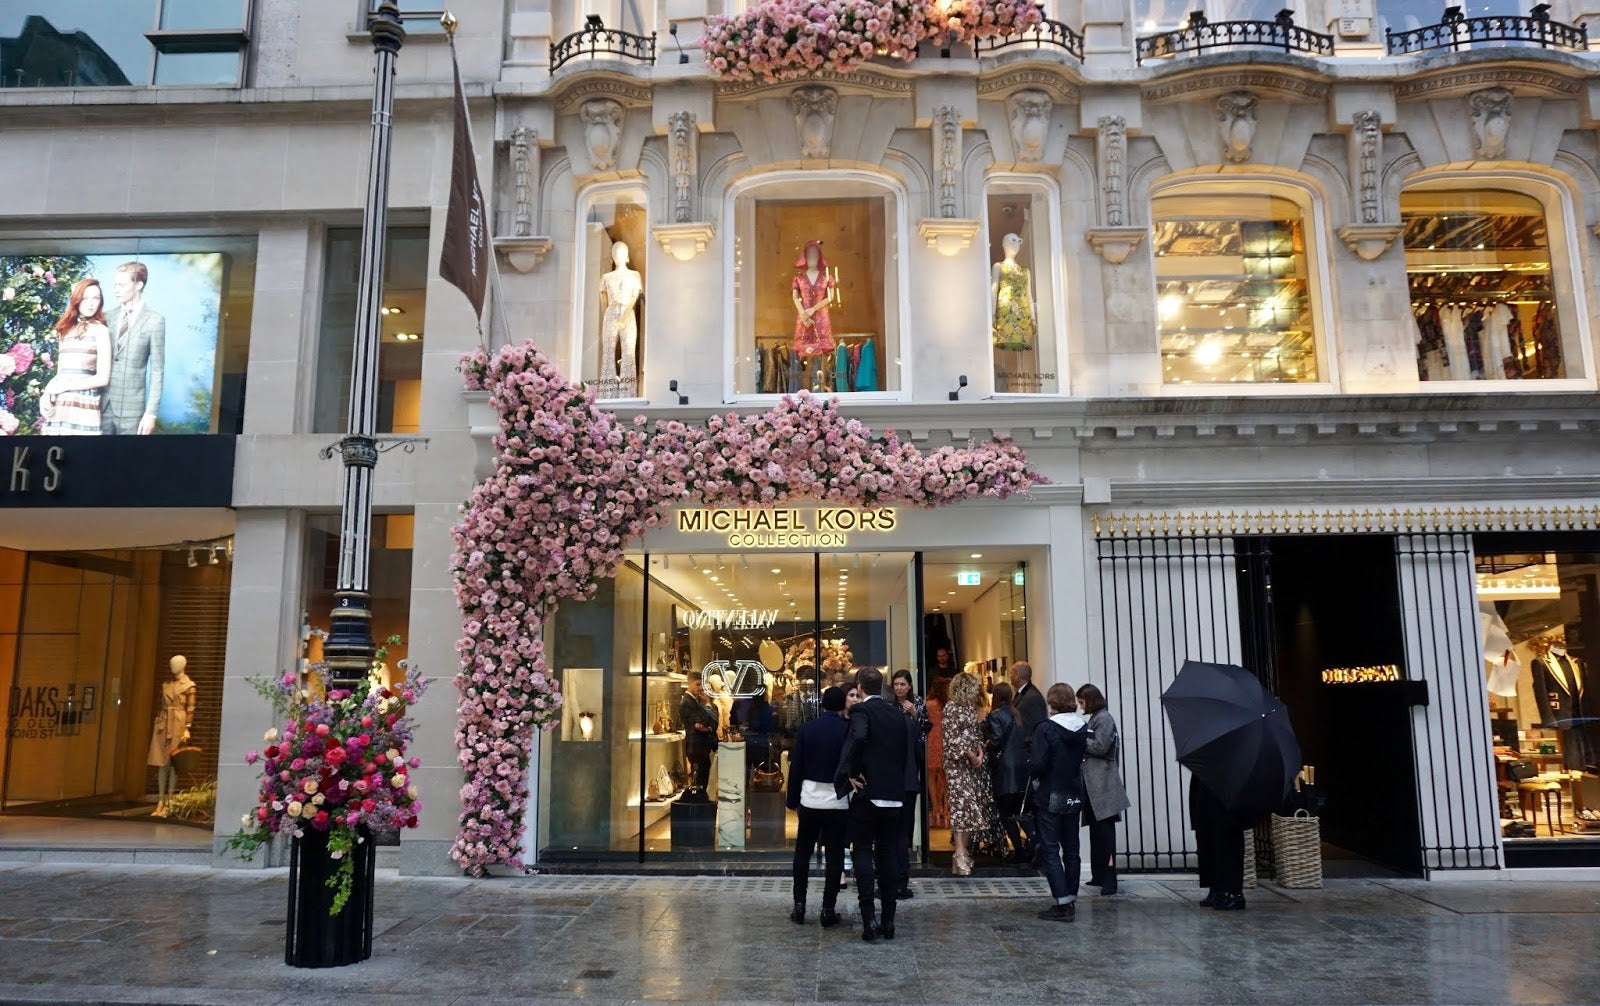 A First Look At Michael Kors's Charming New London Store, British Vogue